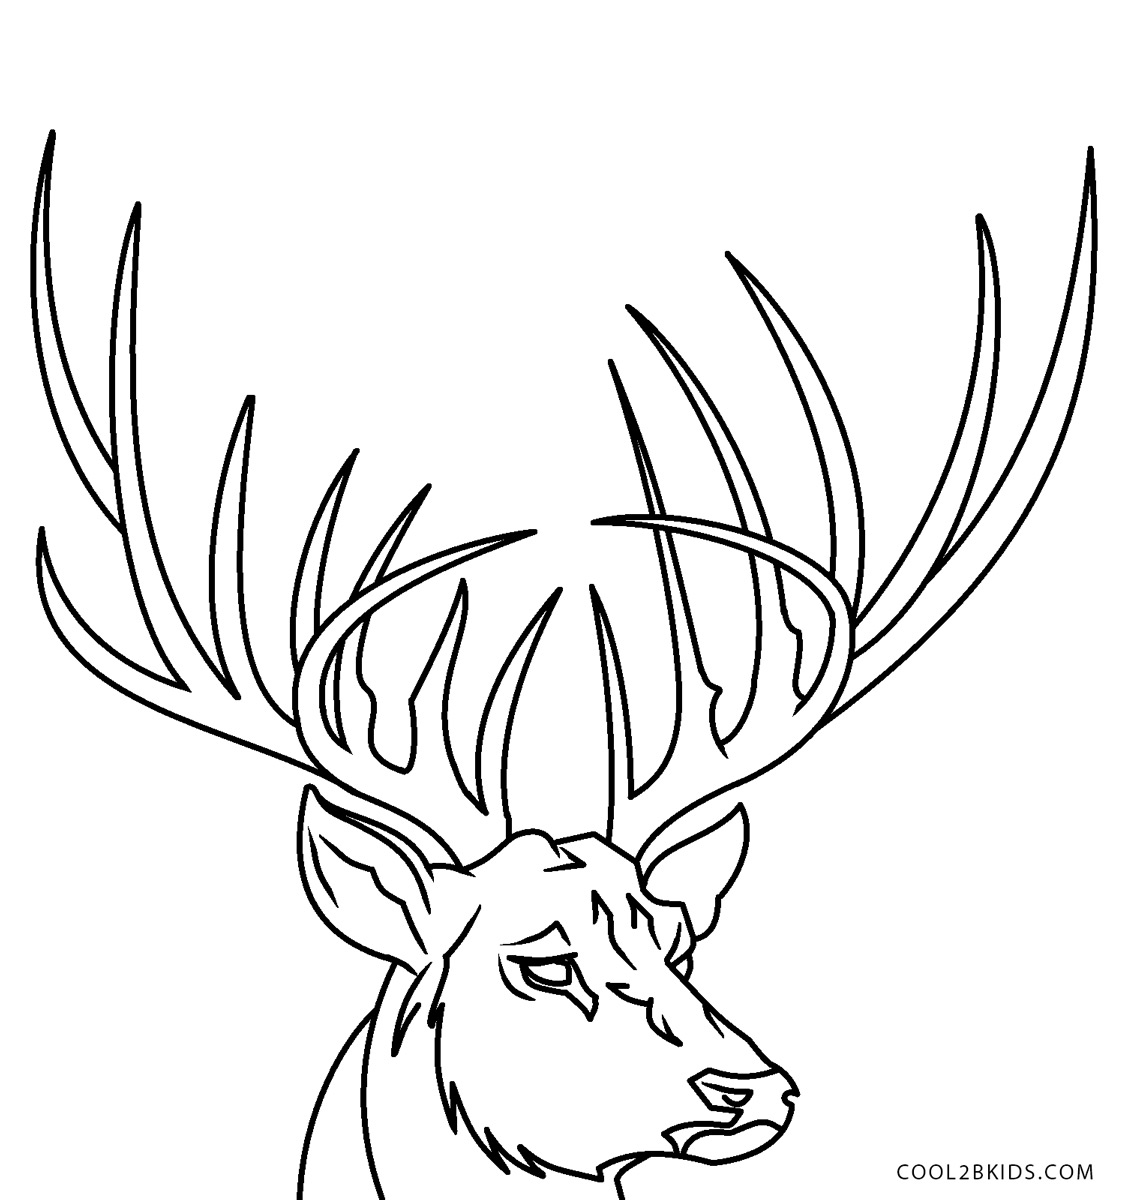 Free Printable Deer Coloring Pages For Kids | Cool2bKids